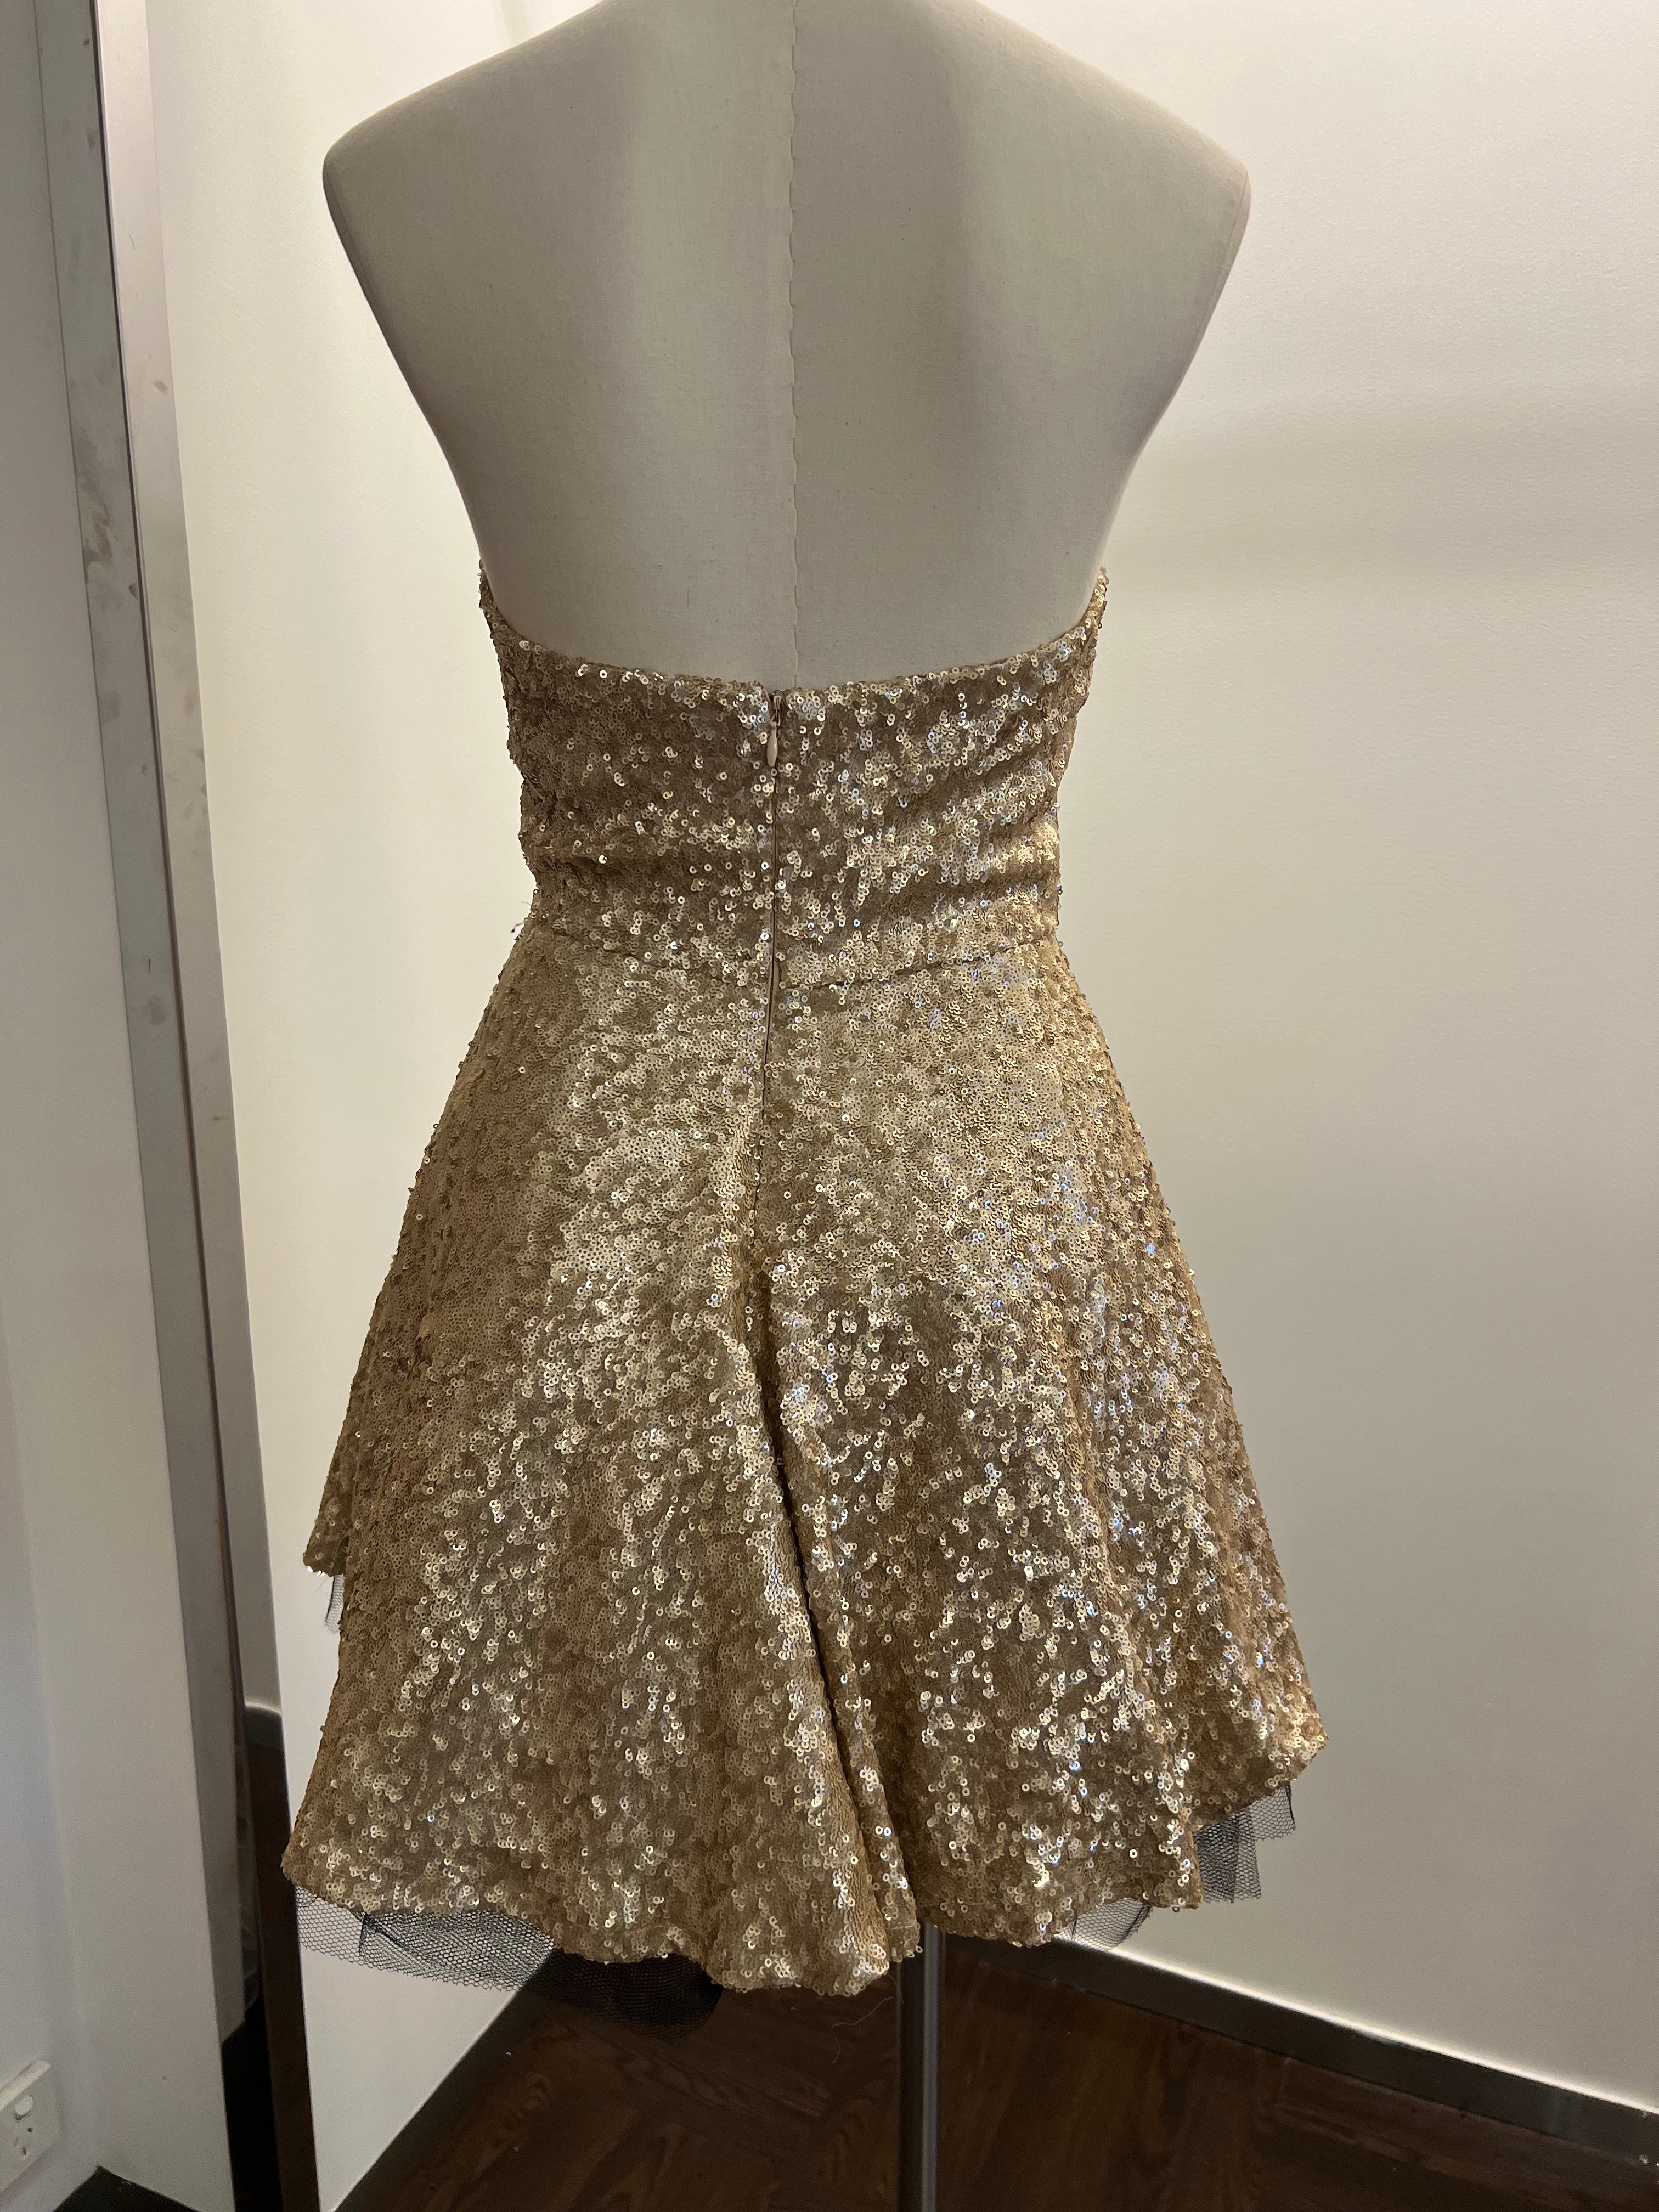 Size 8 - Gold Sequinned